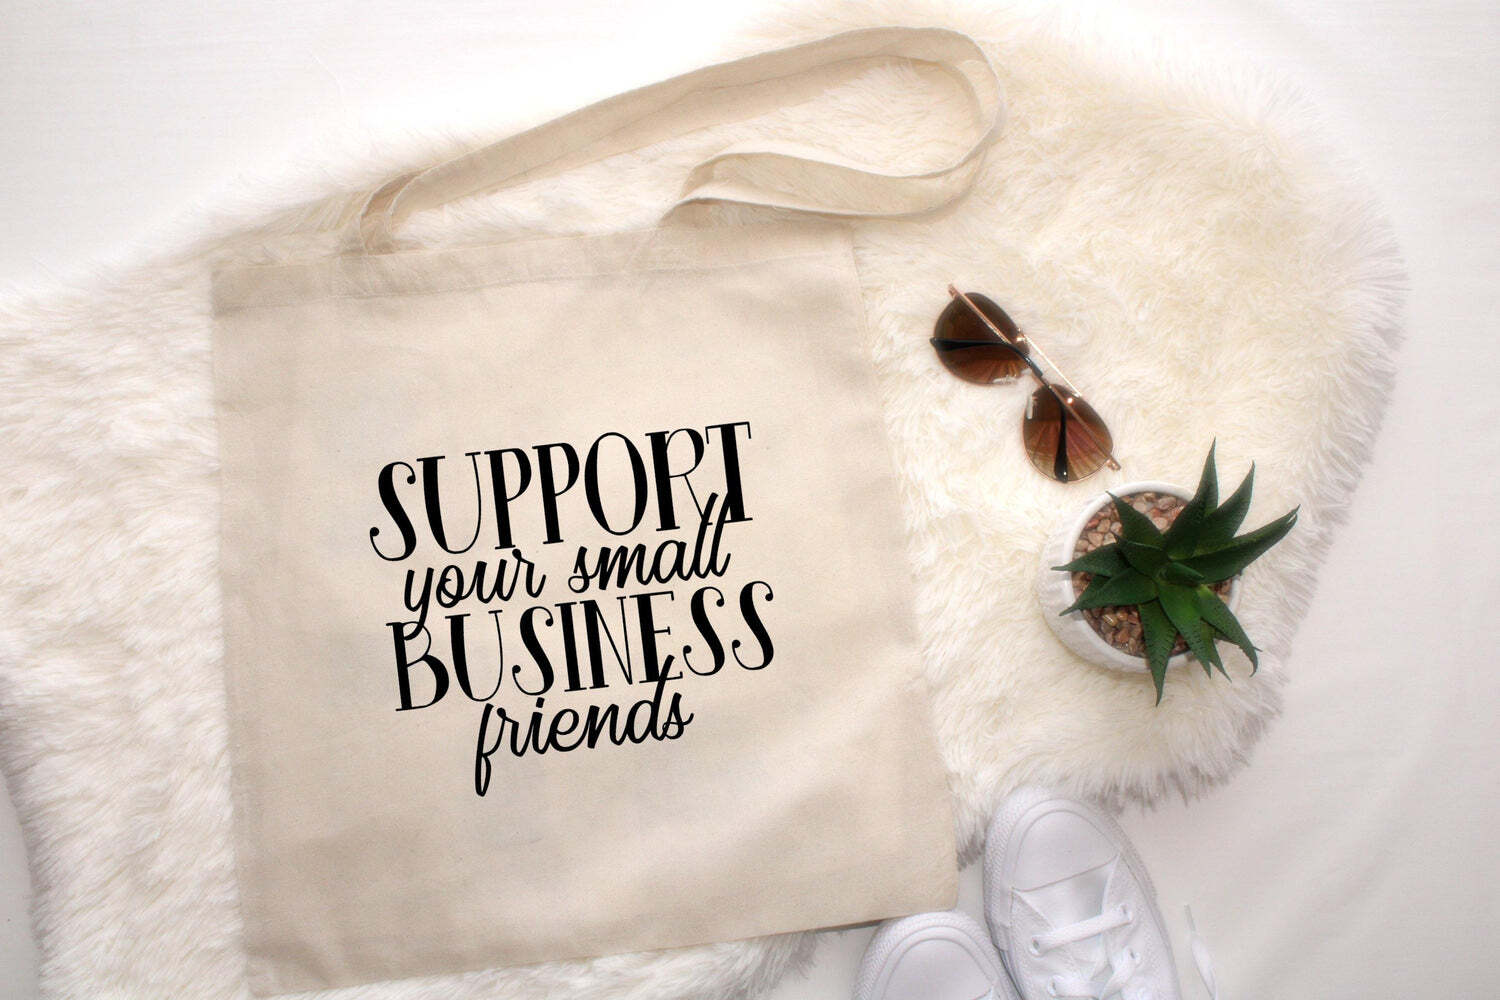 Custom Tote Bags, Create your Personalized Printed Tote Bags Design